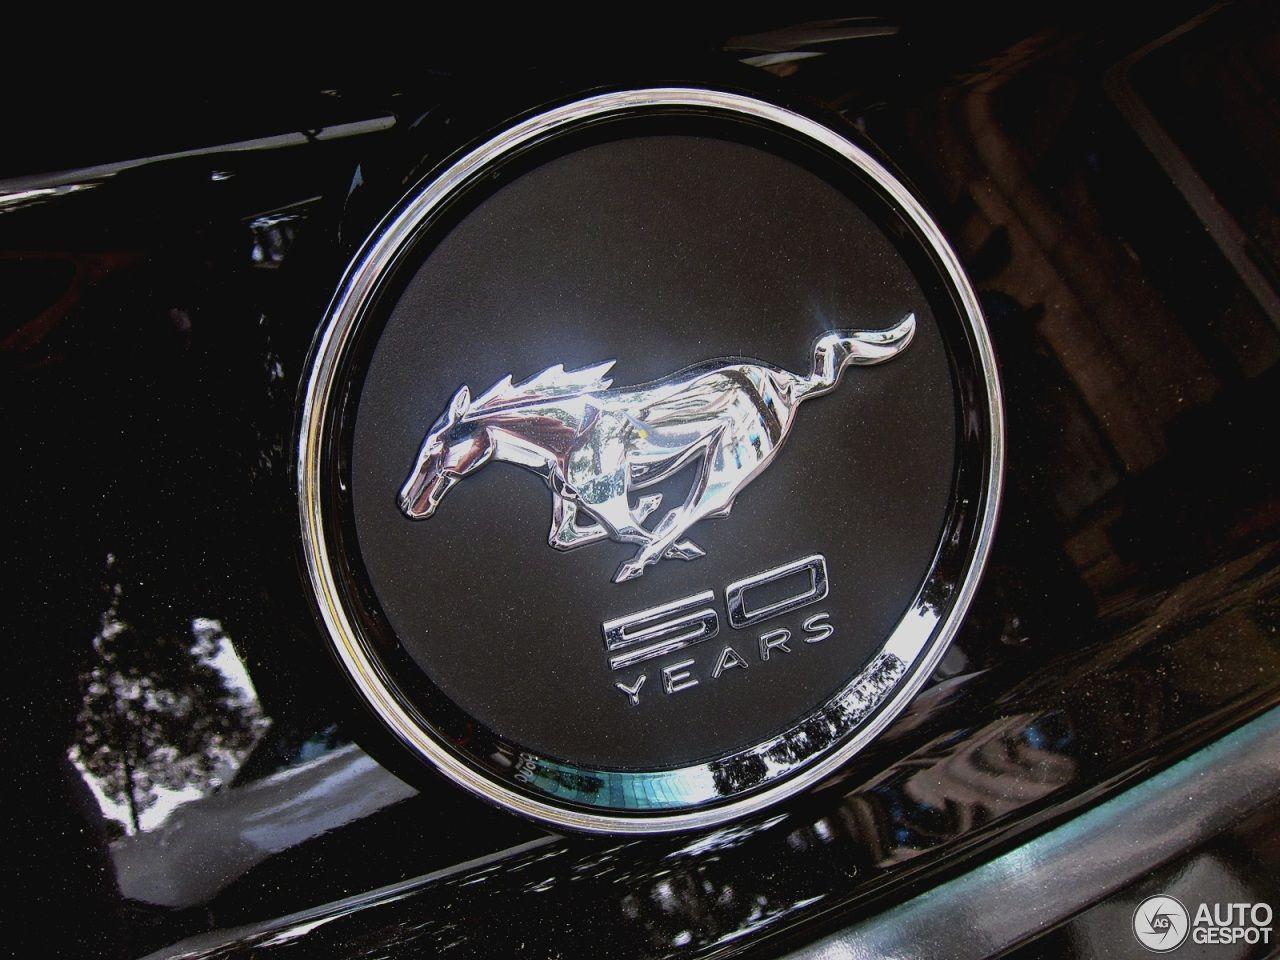 Ford Mustang 50th Anniversary Logo - Ford Mustang GT 50th Anniversary Edition - 1 September 2016 - Autogespot